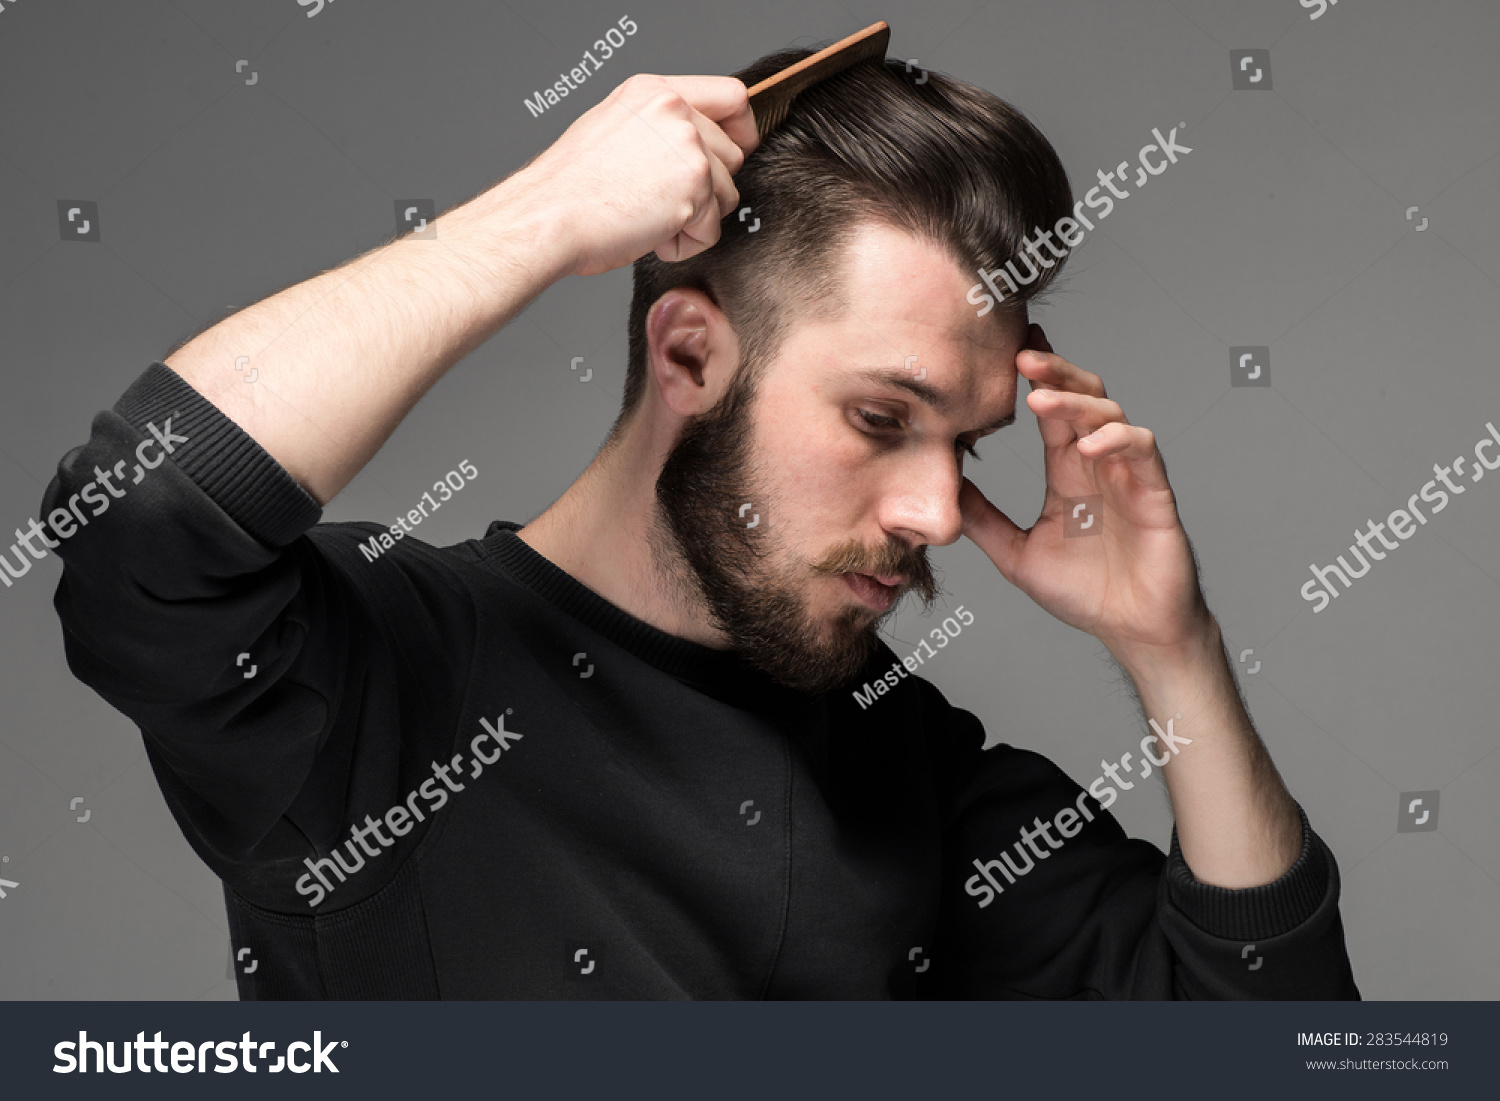 young man comb his hair on gray background #283544819